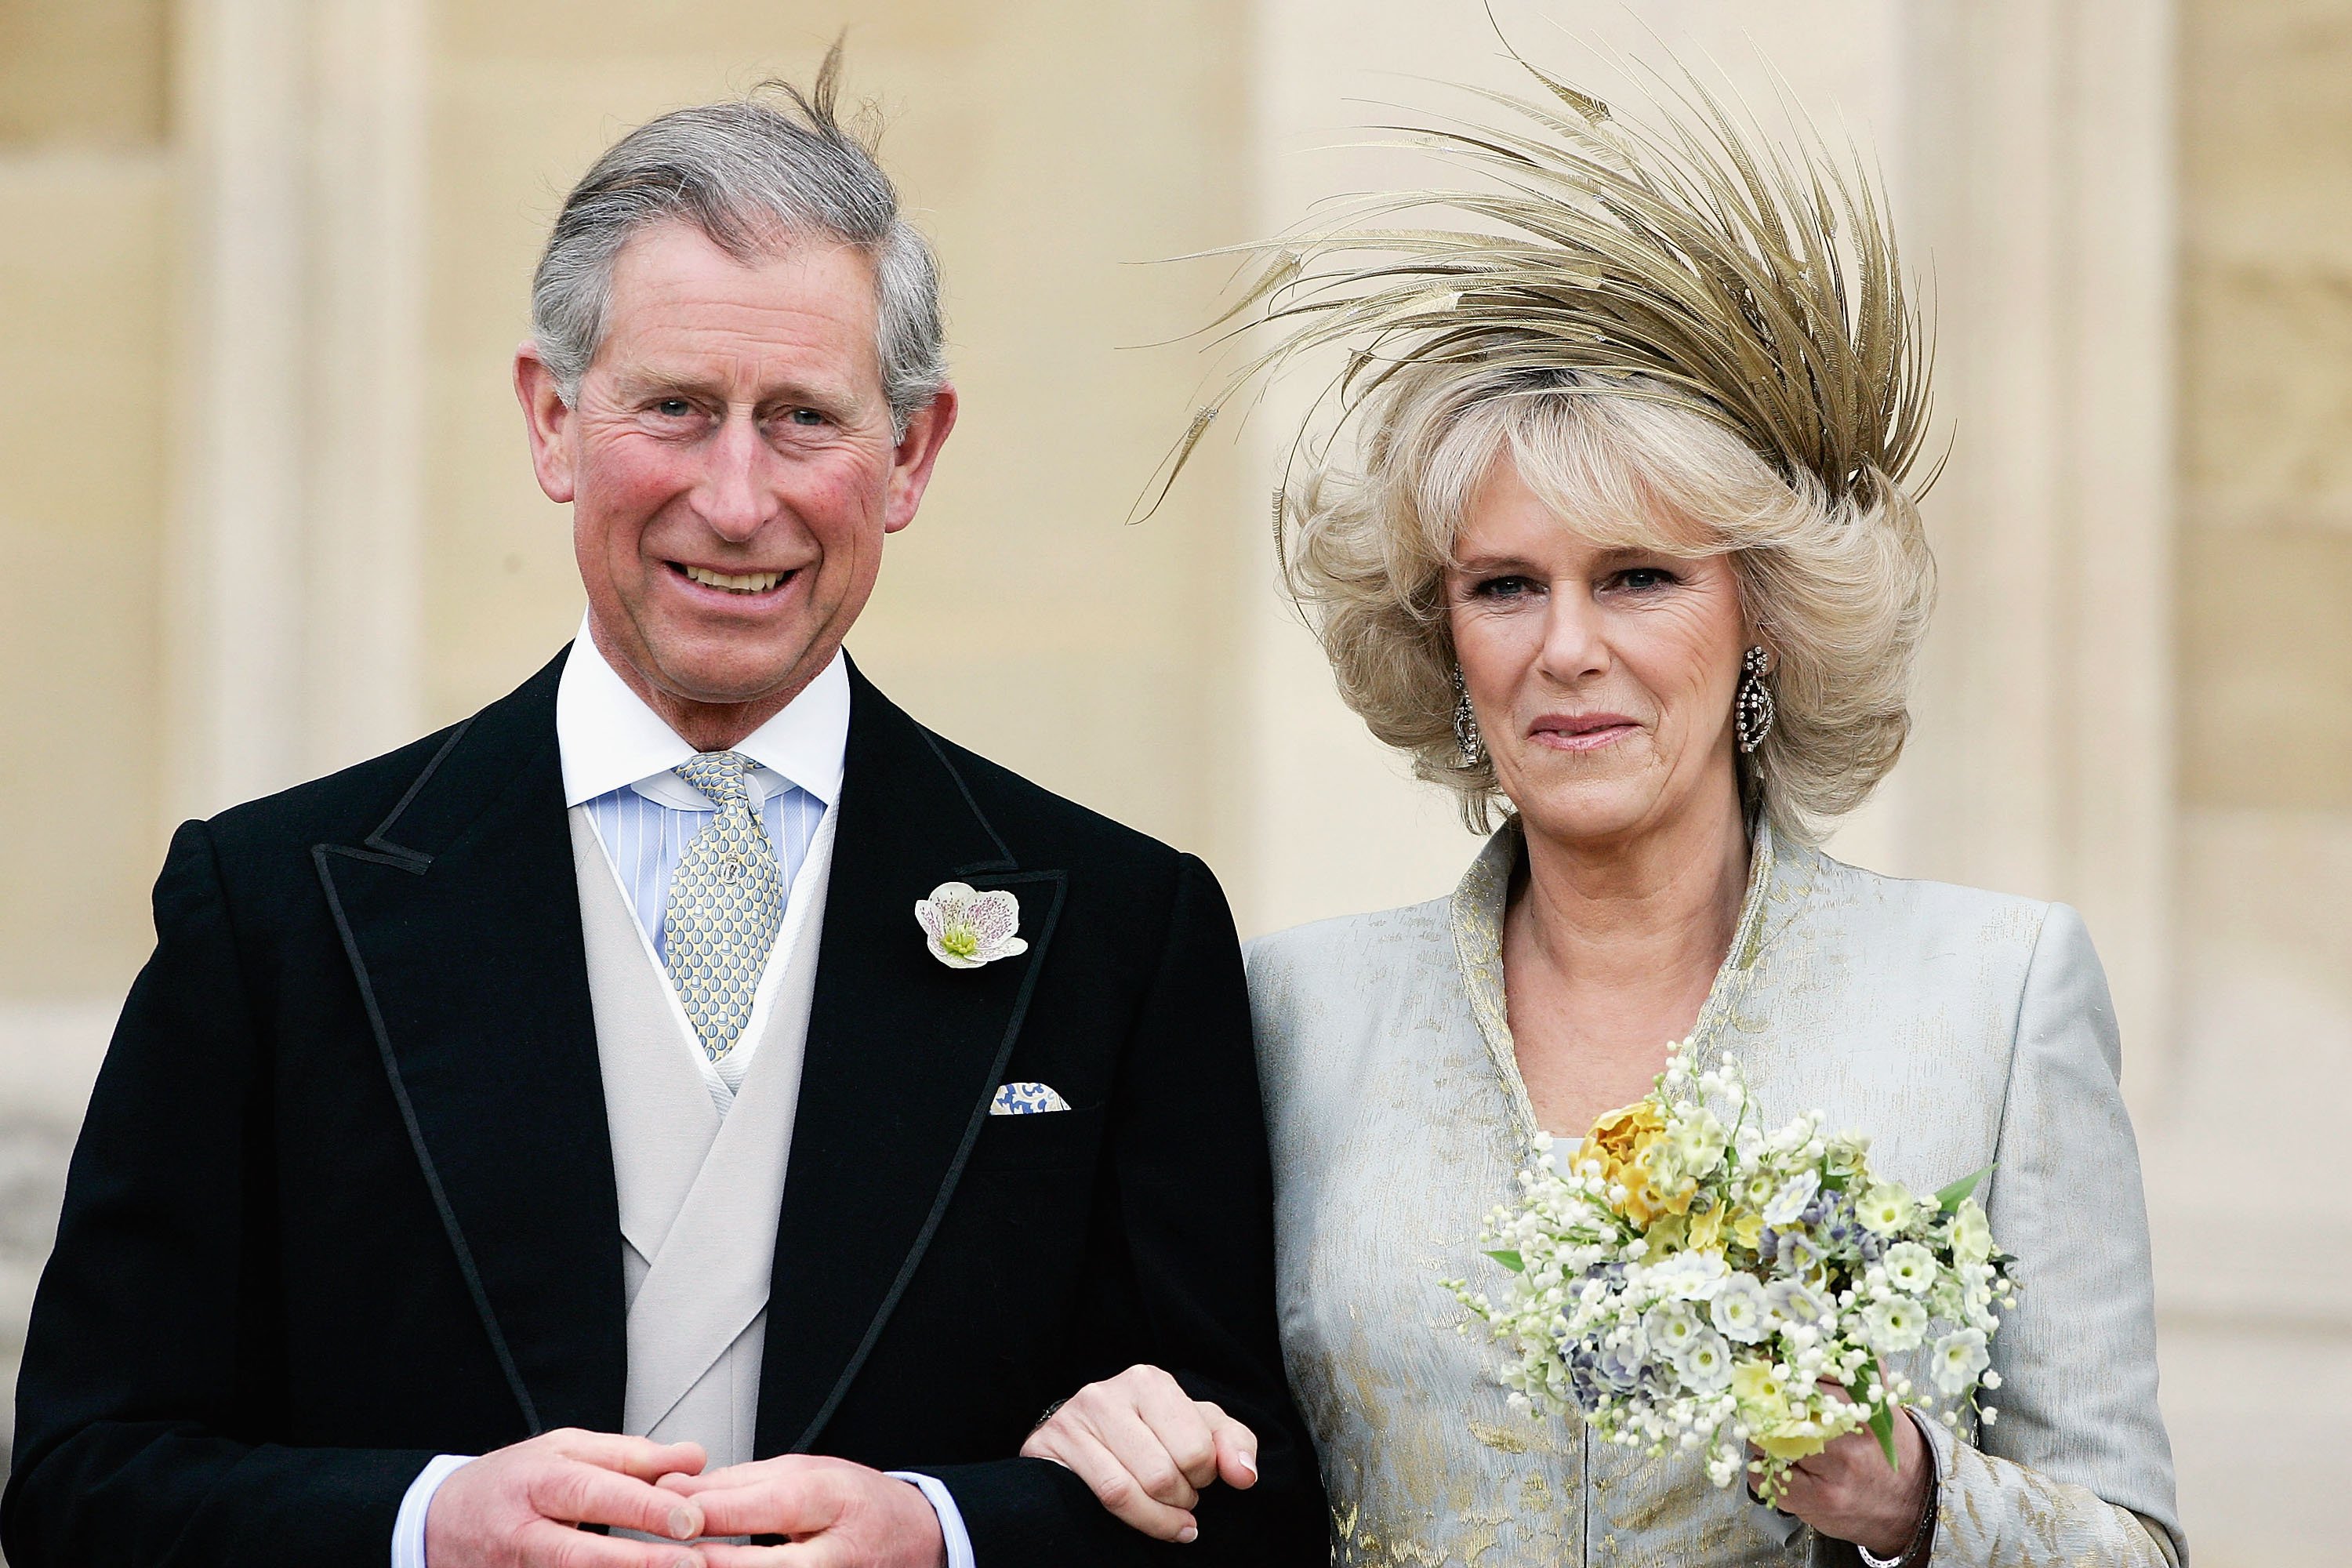 King Charles III and the Queen Consort on their wedding day at Windsor, London 2005. | Source: Getty Images